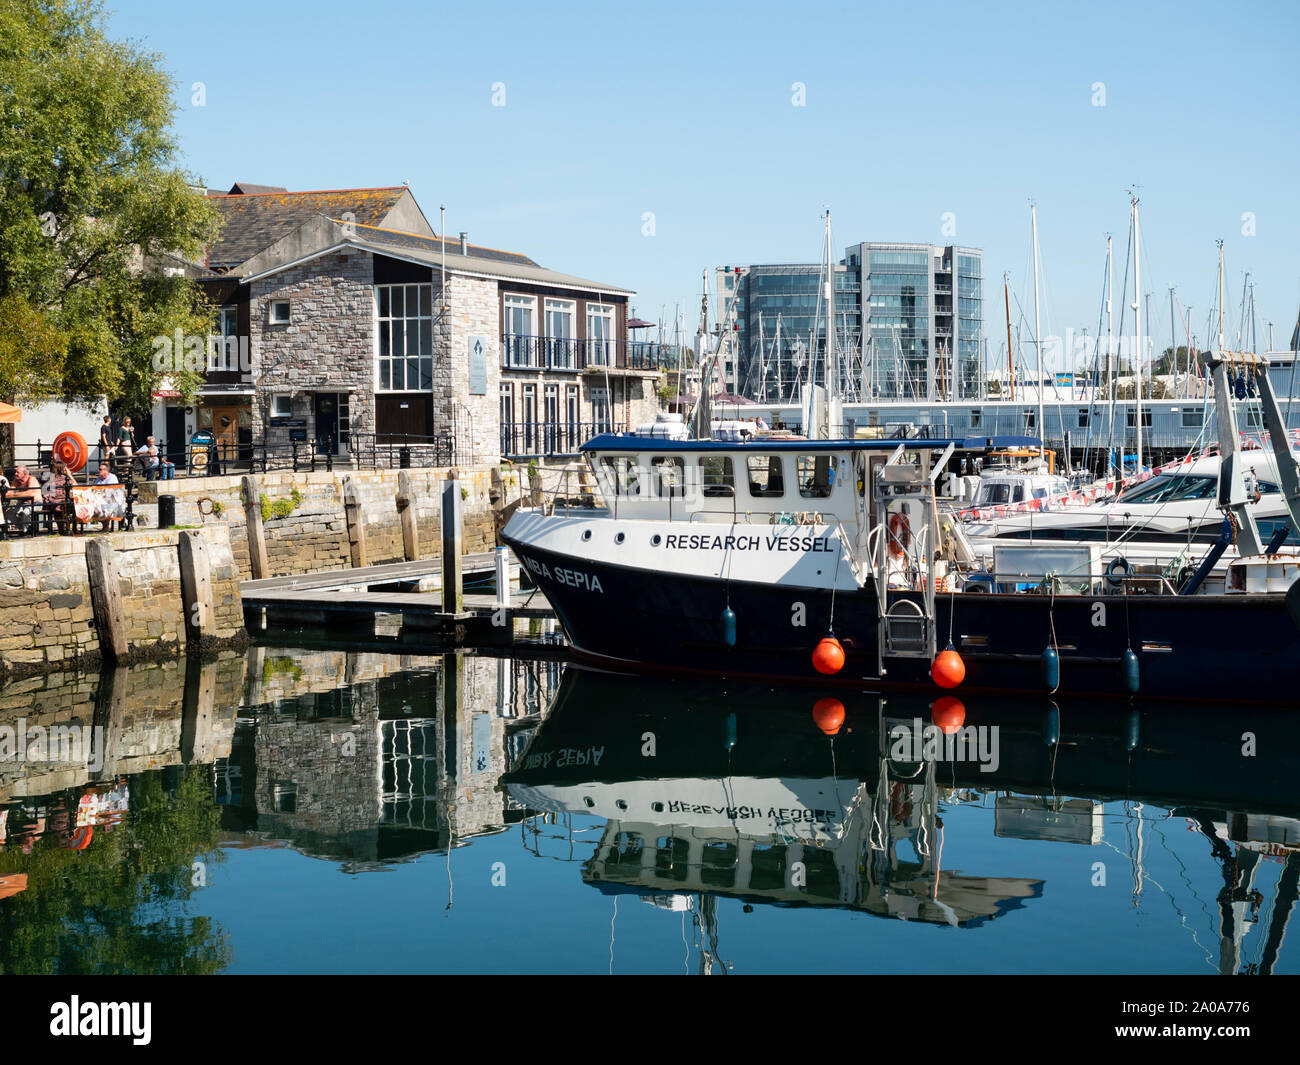 Marine Biological Association Research Vessel 'Sepia' in Sutton Harbour, Plymouth, UK Stock Photo